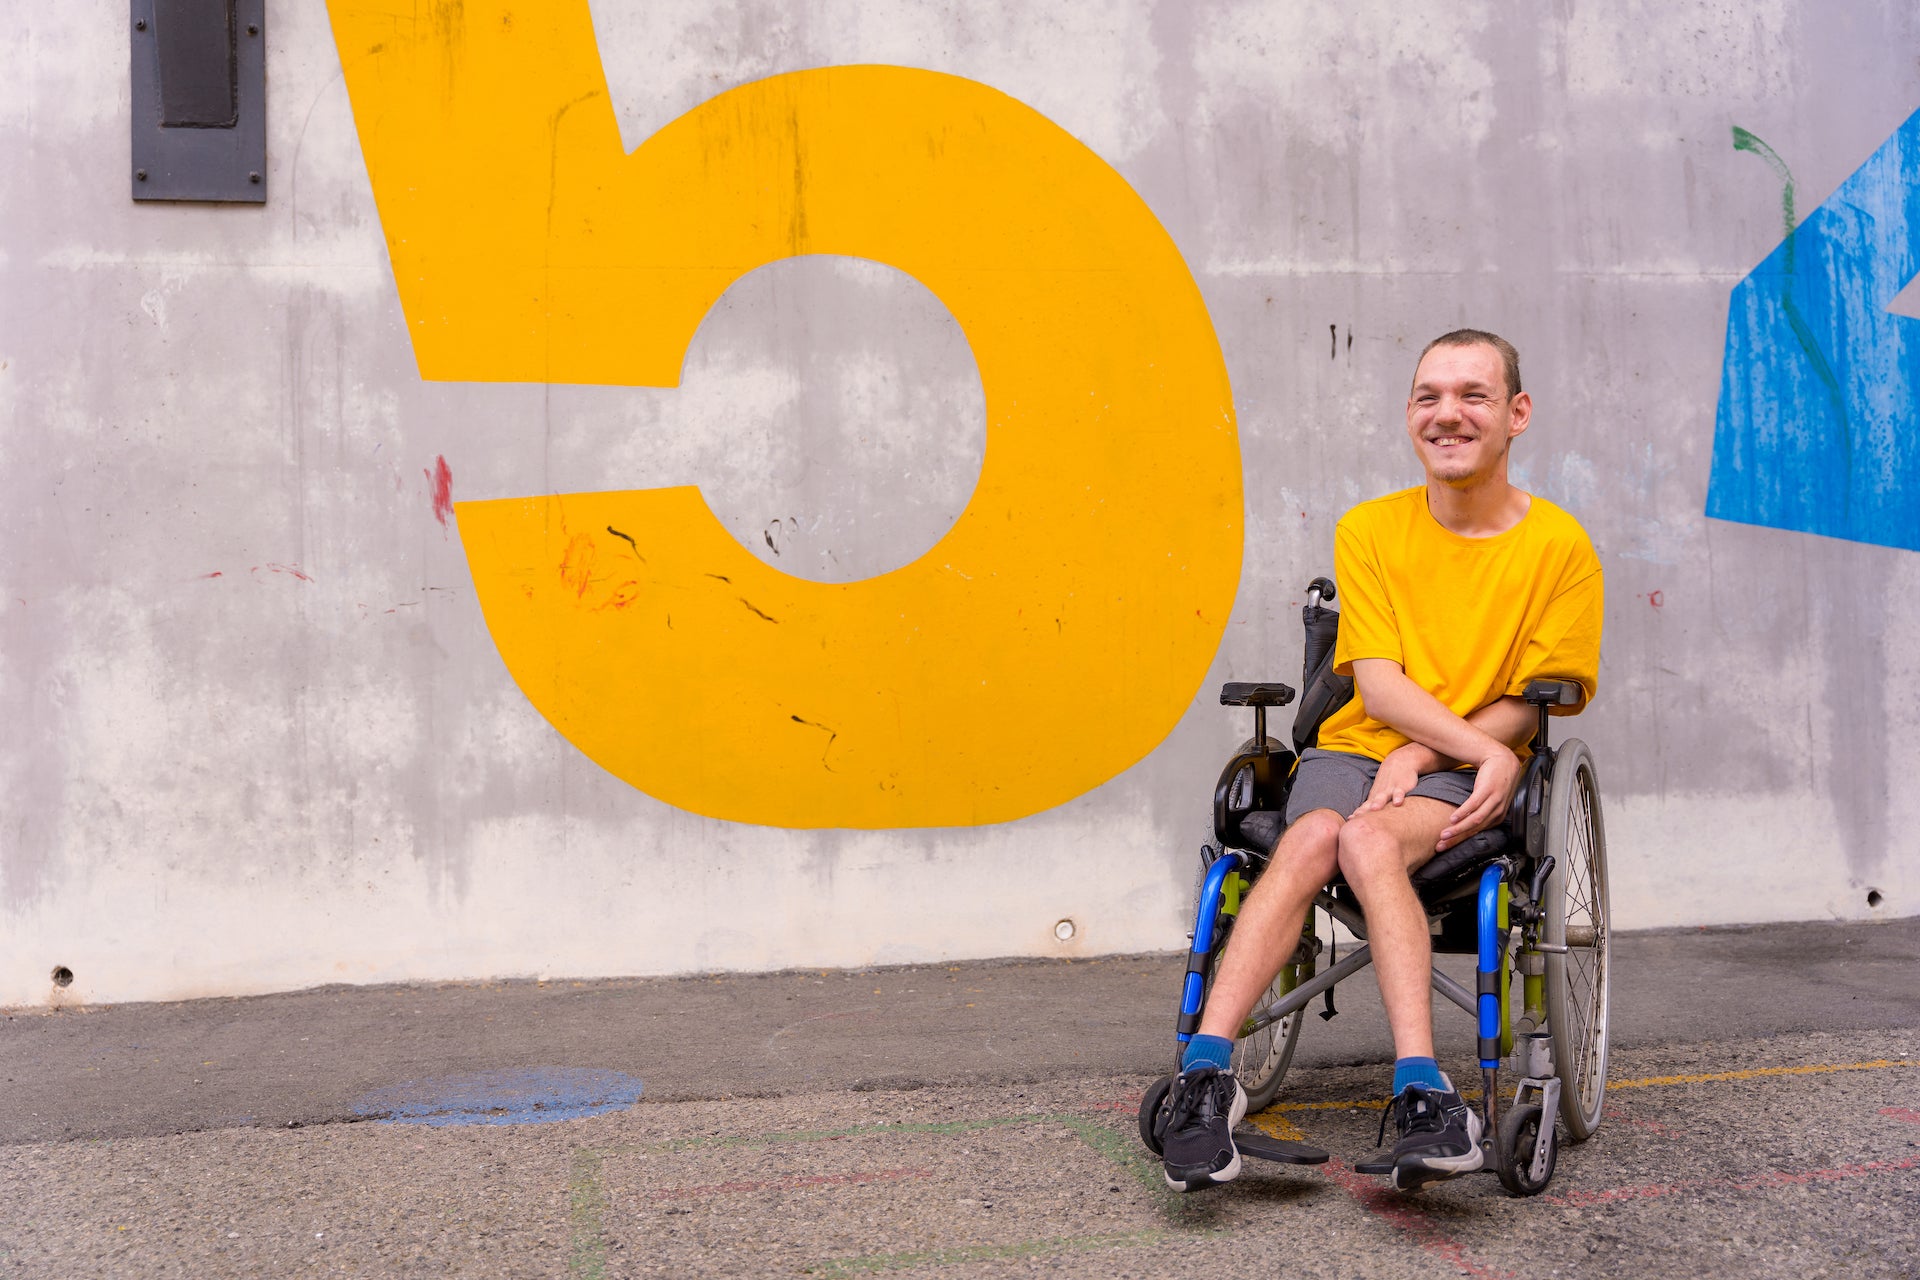 A person wearing a yellow shirt and sitting in a wheelchair, is in front of a concrete wall with yellow and blue paint that could be large numbers.